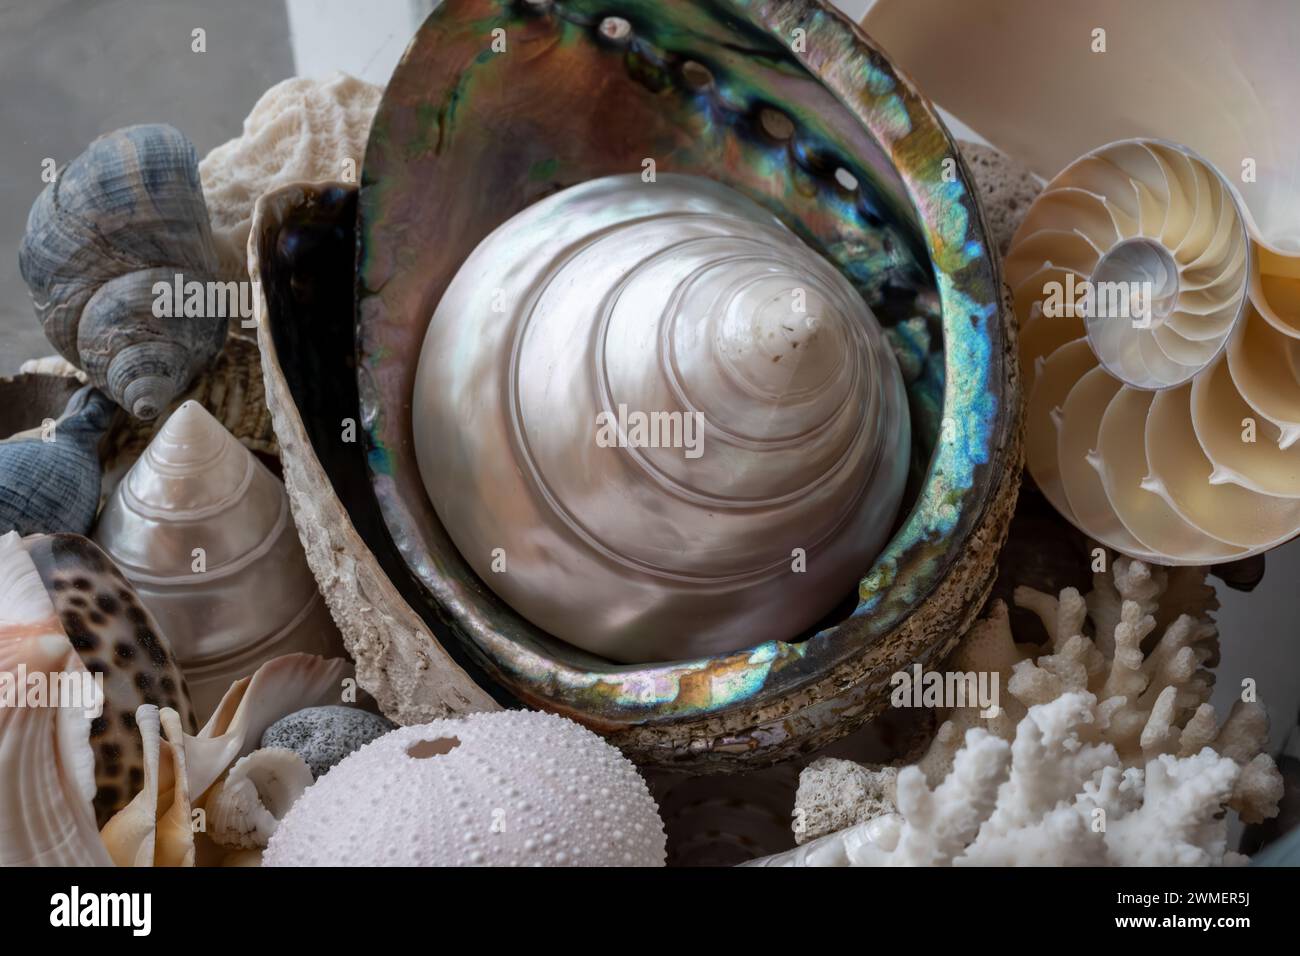 Beautiful collection of different tropical sea shells white pearly Trochus Tectus niloticus, corals, close up Stock Photo